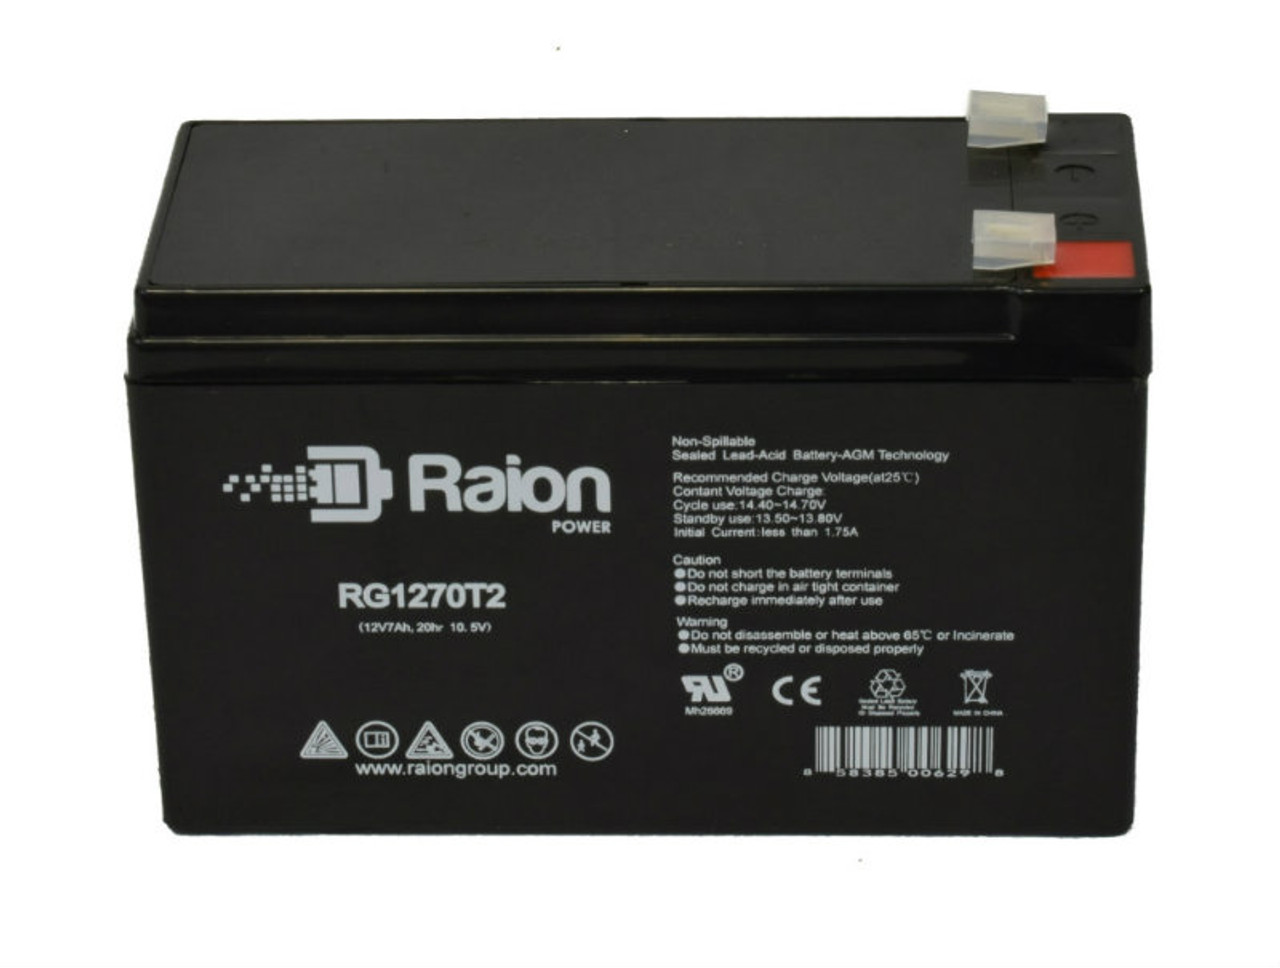 Raion Power RG1270T1 12V 7Ah Lead Acid Battery for Motion Madness Canada Goose Peck And Sweep Feeder Head Stretcher